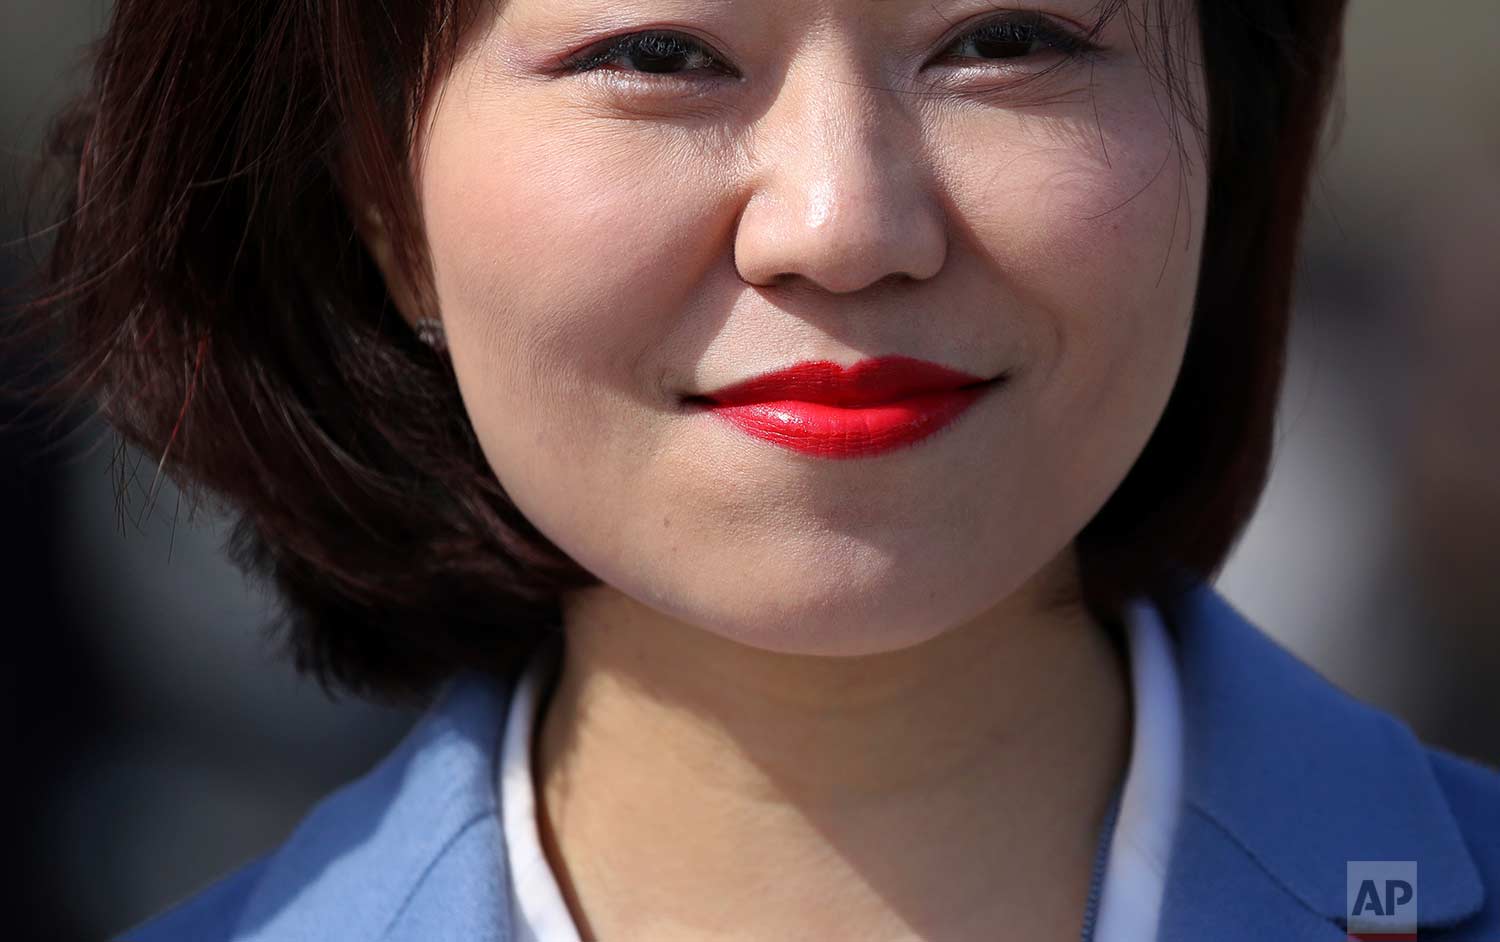  In this Thursday, March 15, 2018 photo, a staff member wears red lipstick as she leaves after the closing session of the Chinese People's Political Consultative Conference (CPPCC) at the Great Hall of the People in Beijing. (AP Photo/Aijaz Rahi) 